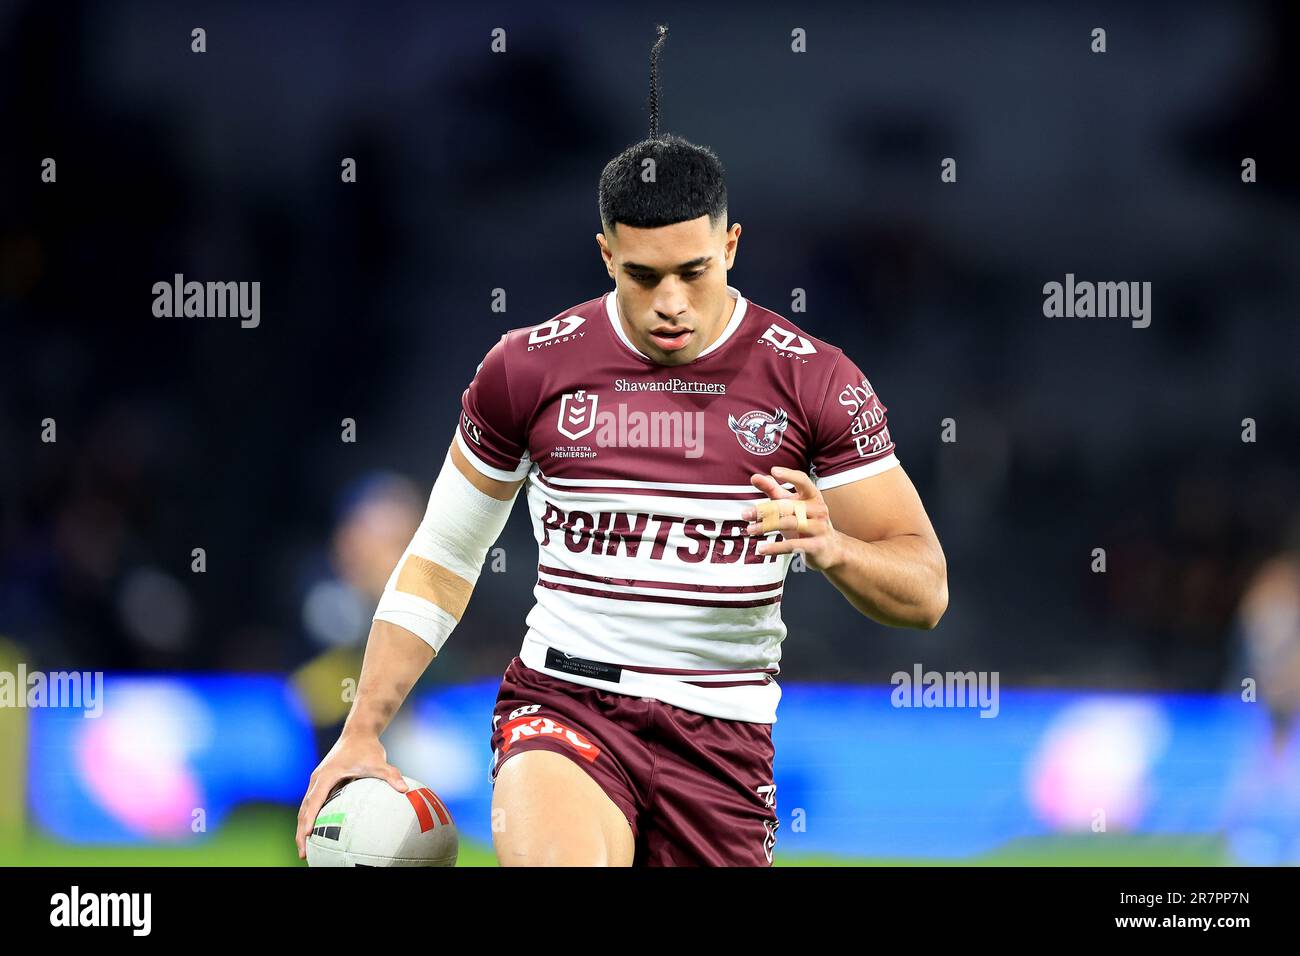 https://c8.alamy.com/comp/2R7PP7N/sydney-australia-17th-june-2023-tolutau-koula-of-the-sea-eagles-warms-up-ahead-of-the-nrl-round-16-match-between-the-parramatta-eels-and-the-manly-warringah-sea-eagles-at-commbank-stadium-in-sydney-saturday-june-17-2023-aap-imagejenny-evans-no-archiving-editorial-use-only-credit-australian-associated-pressalamy-live-news-2R7PP7N.jpg